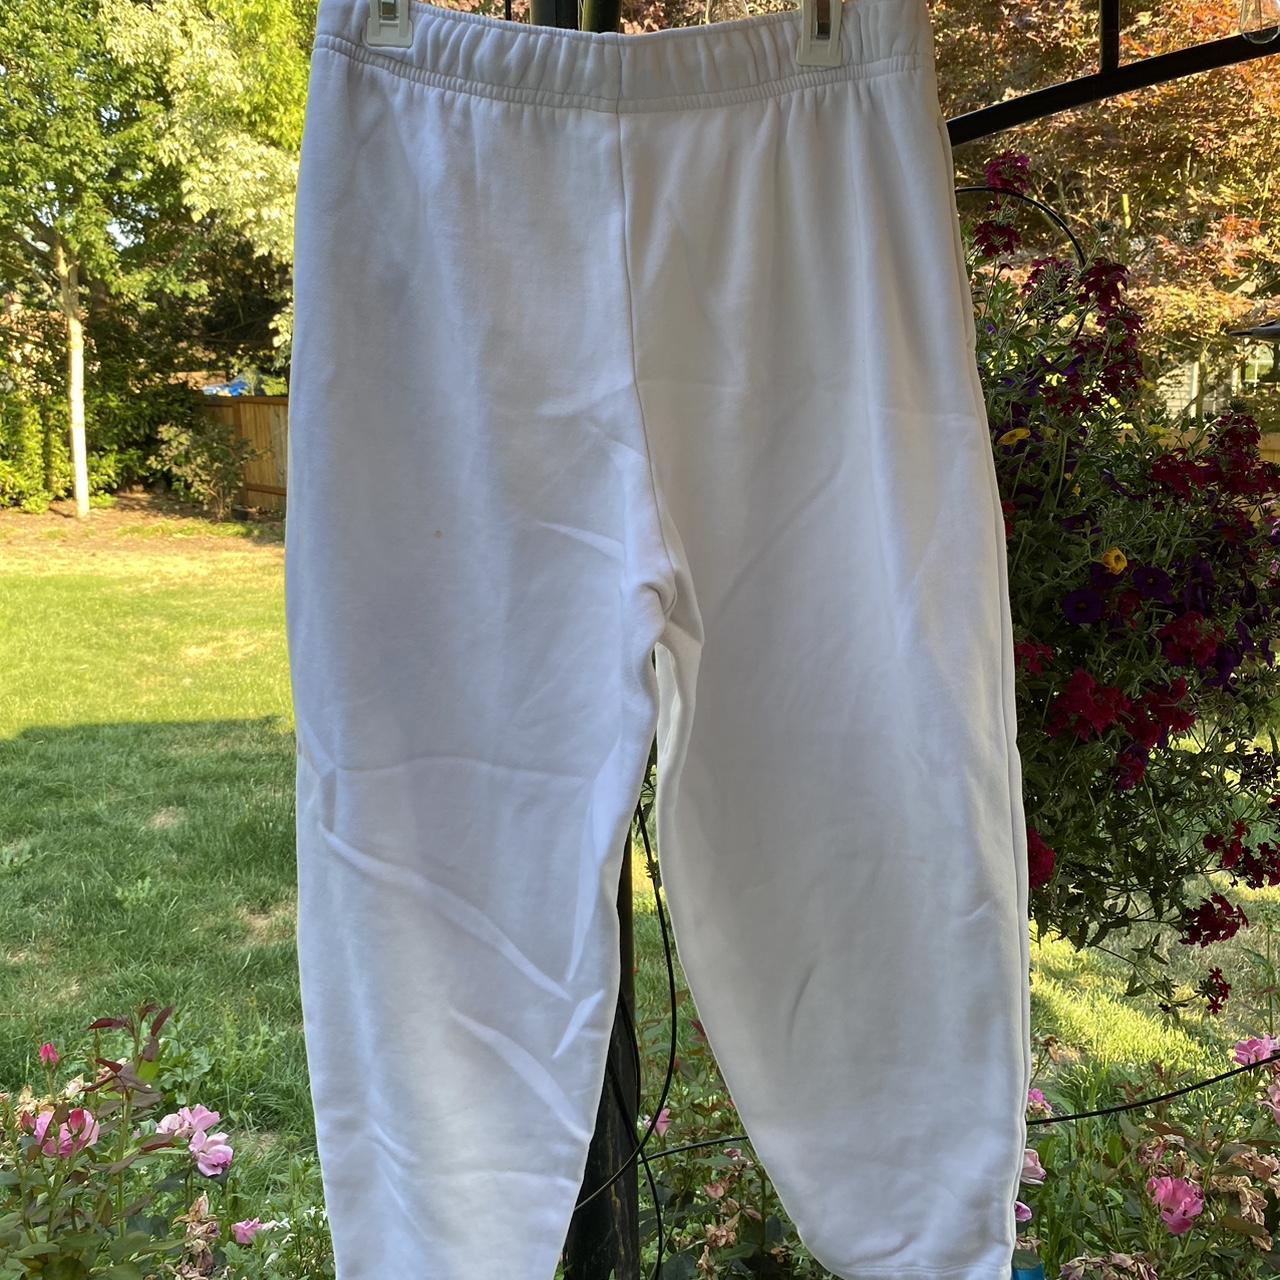 Nike white baggy sweatpants. Size M. Great condition